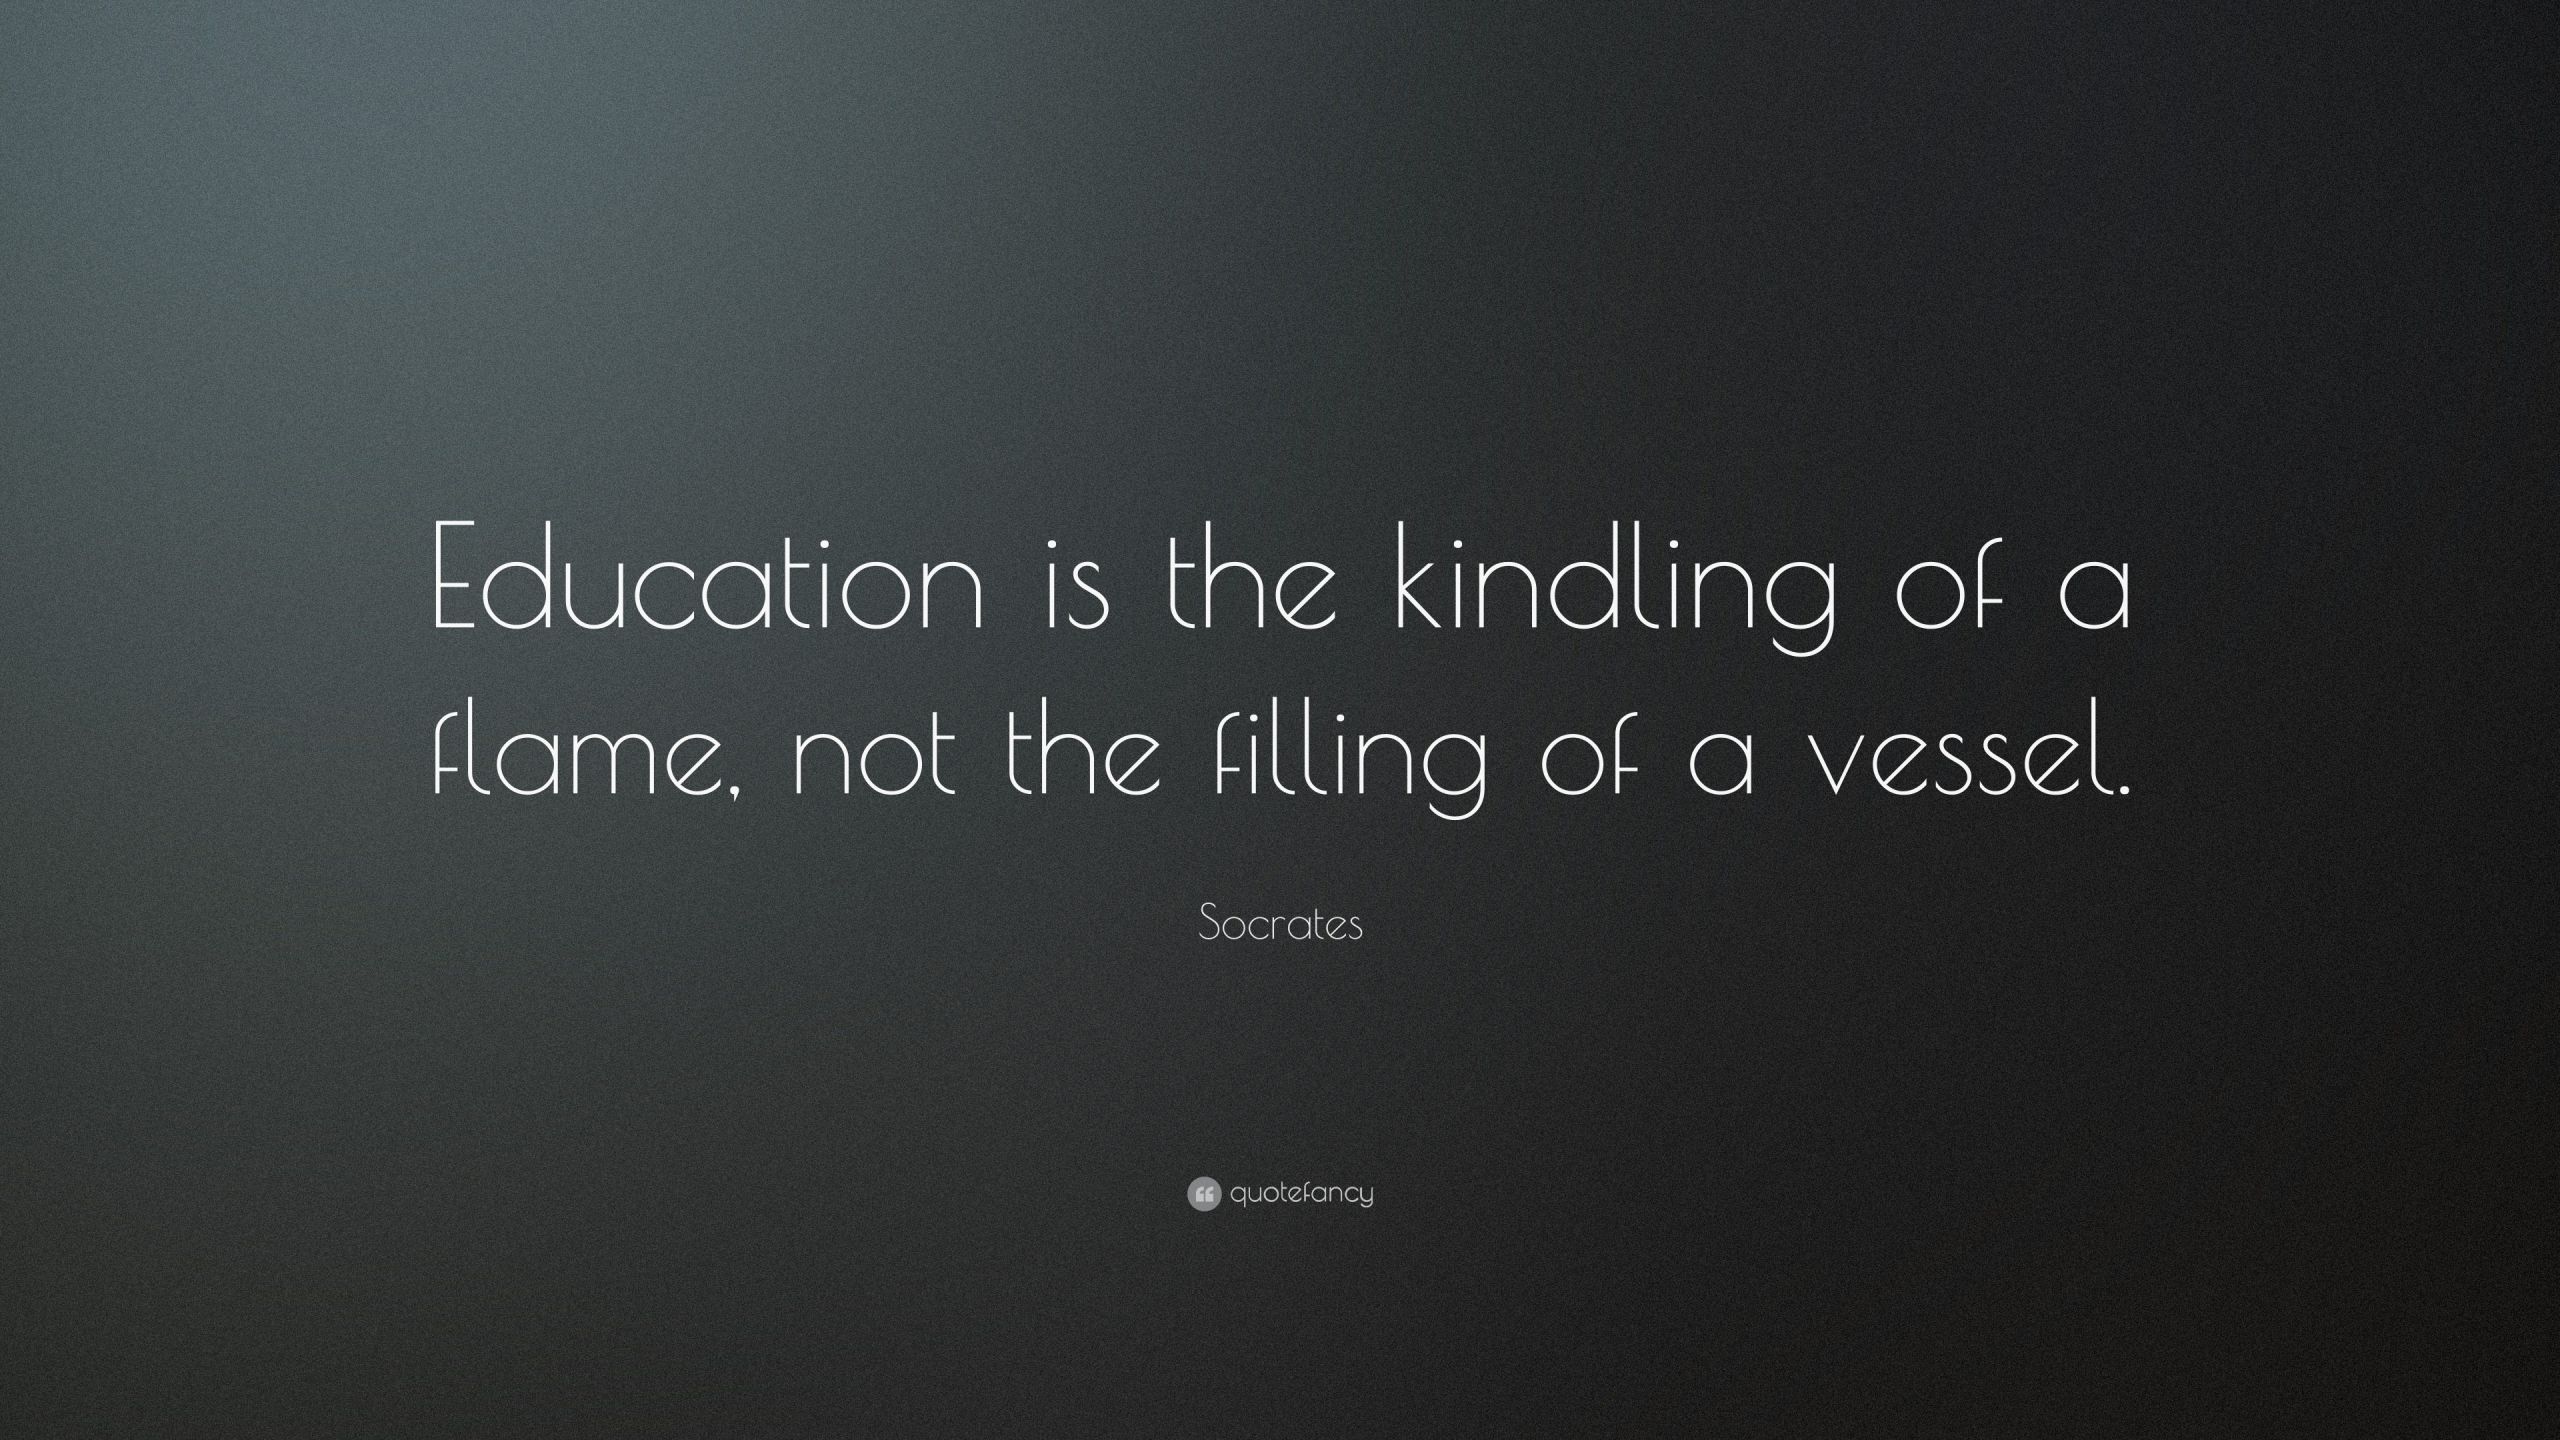 Socrates Education Quotes
 Socrates Quote “Education is the kindling of a flame not